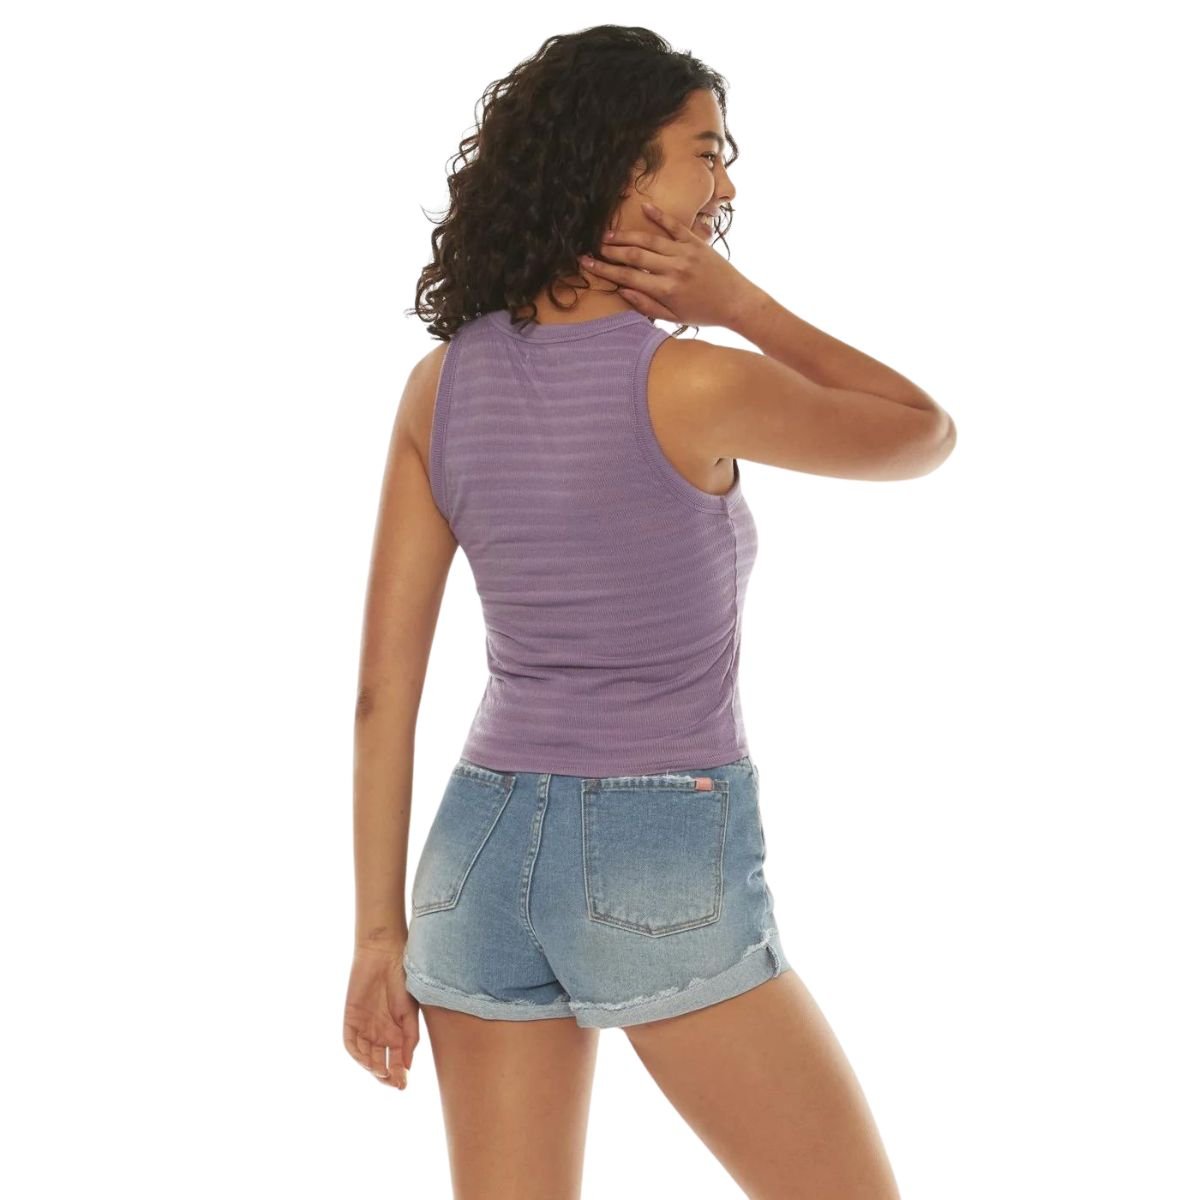 Sisstrevolution Suns Out Knit Tank in Lilac Smoke - BoardCo